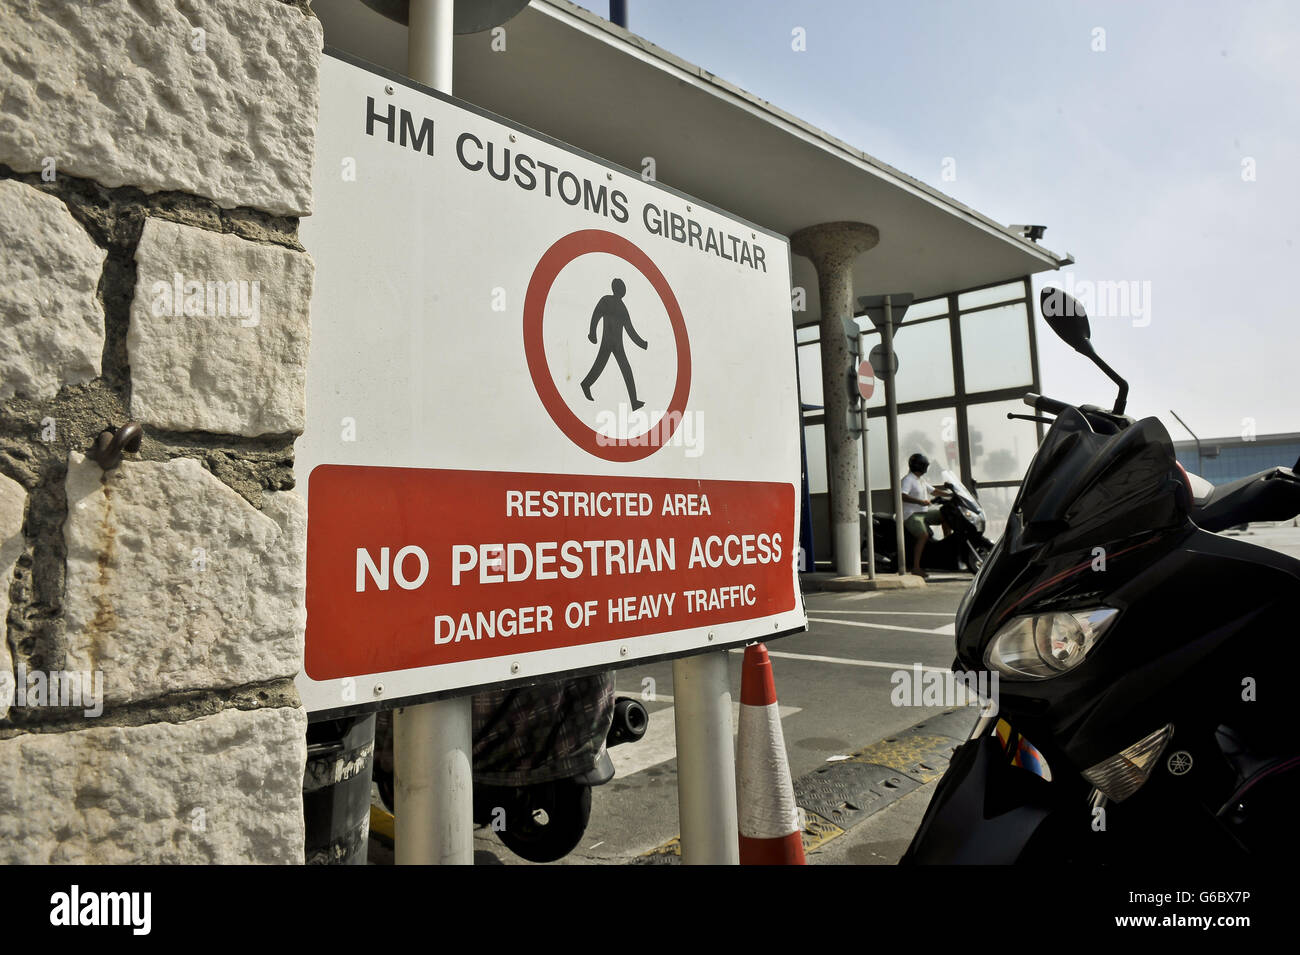 A HM Customs Gibraltar sign on the Gibraltar side of the Spanish border as Spain has agreed to allow European Commission observers to its border with Gibraltar to assess the legality of checks on traffic that caused a diplomatic row with Britain. Stock Photo